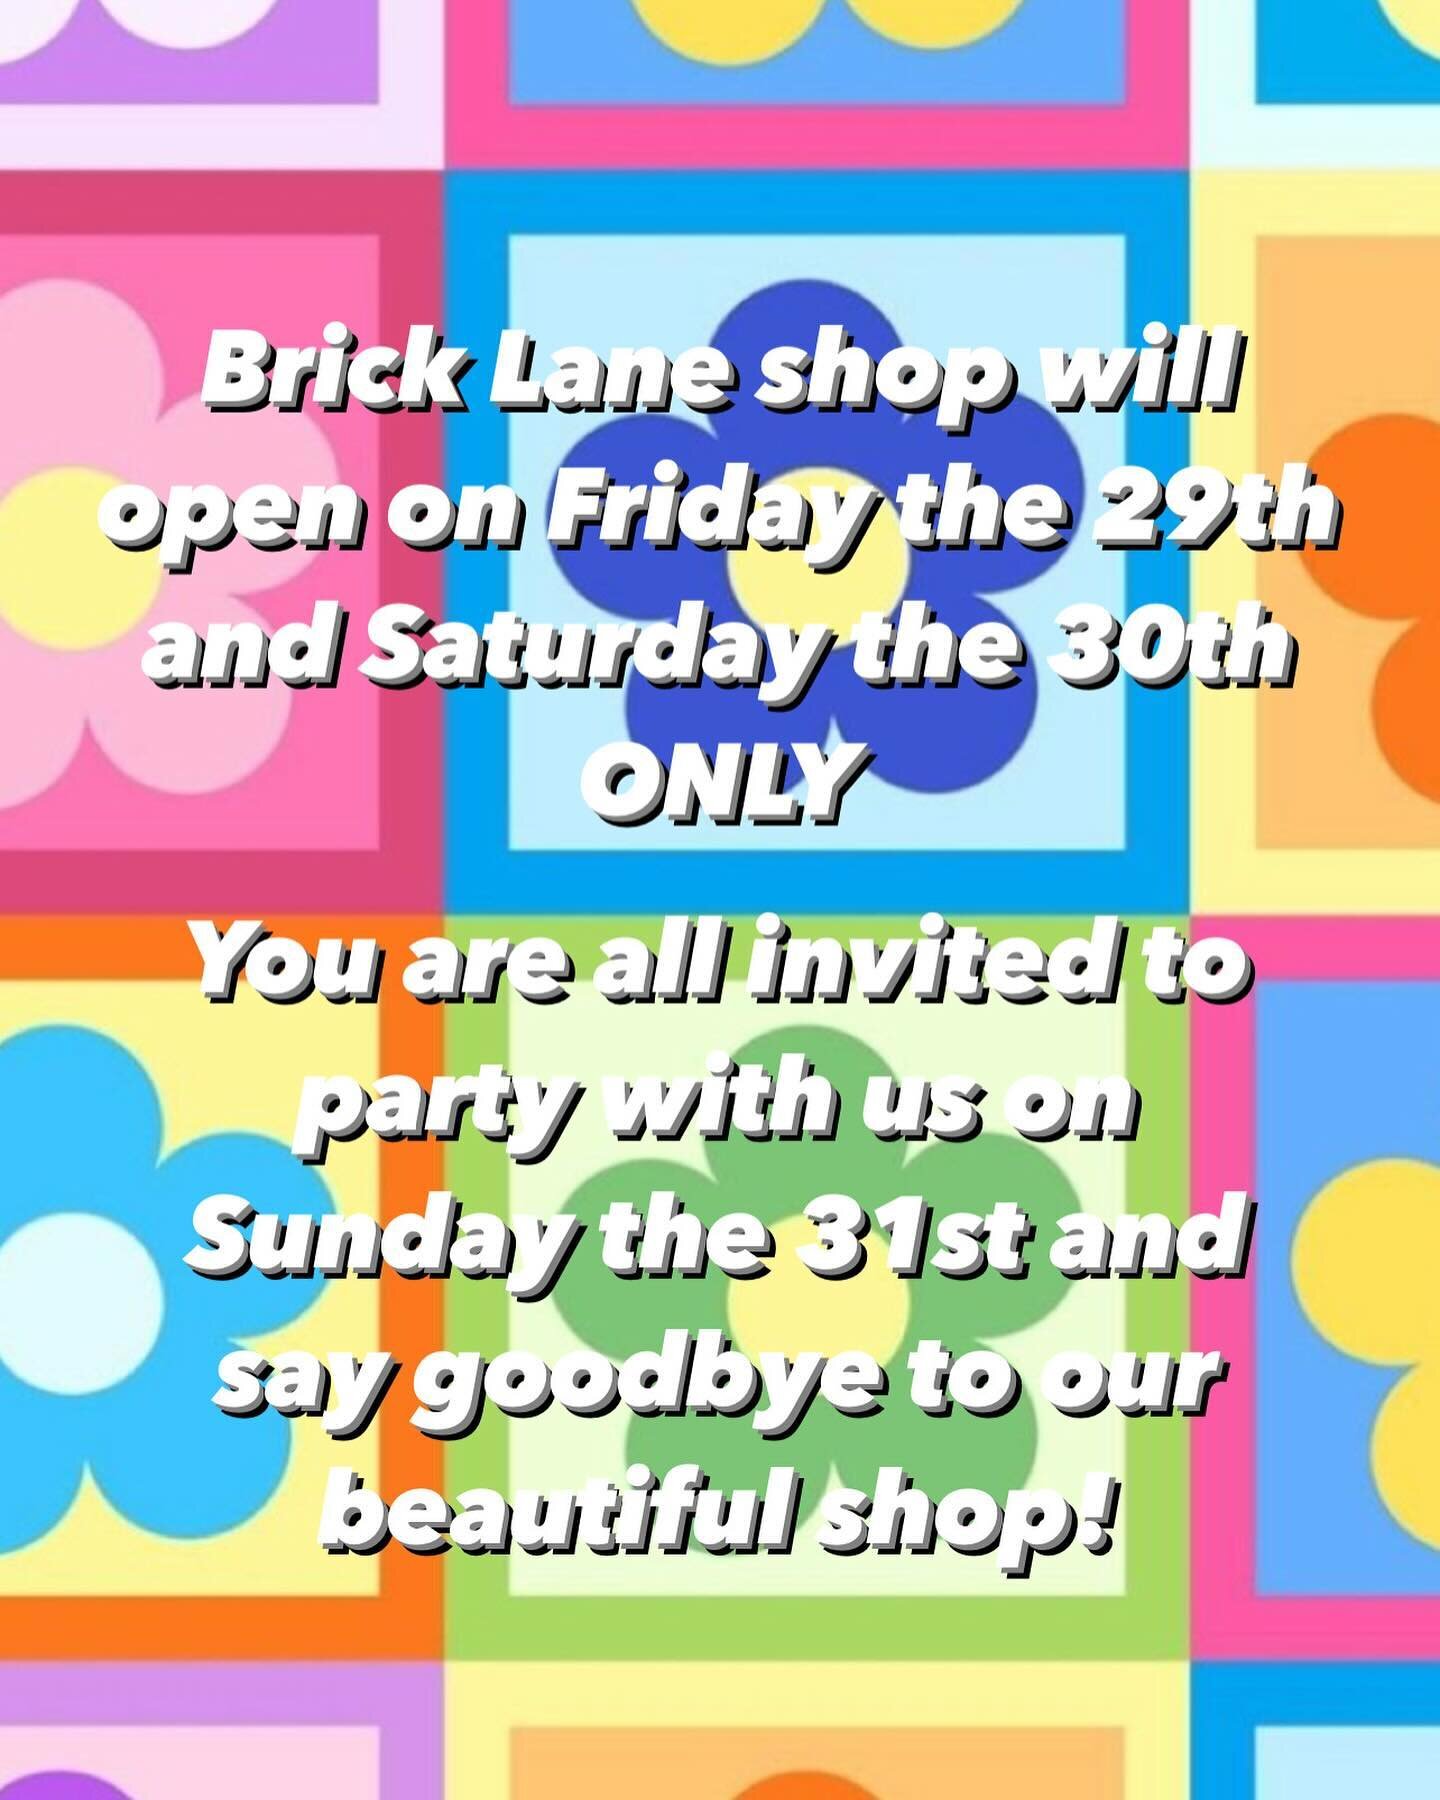 🌈✨Last week of our Brick Lane shop ✨🩷

Easter opening hours:

💜Wednesday - closed 

💙Thursday - closed 

💚Friday - open from 11 to 6 pm

💛Saturday- open from 11 to 6 pm

🧡Sunday - 🥳 party time! From 12 to 5 pm 

❤️The shop will be closed from